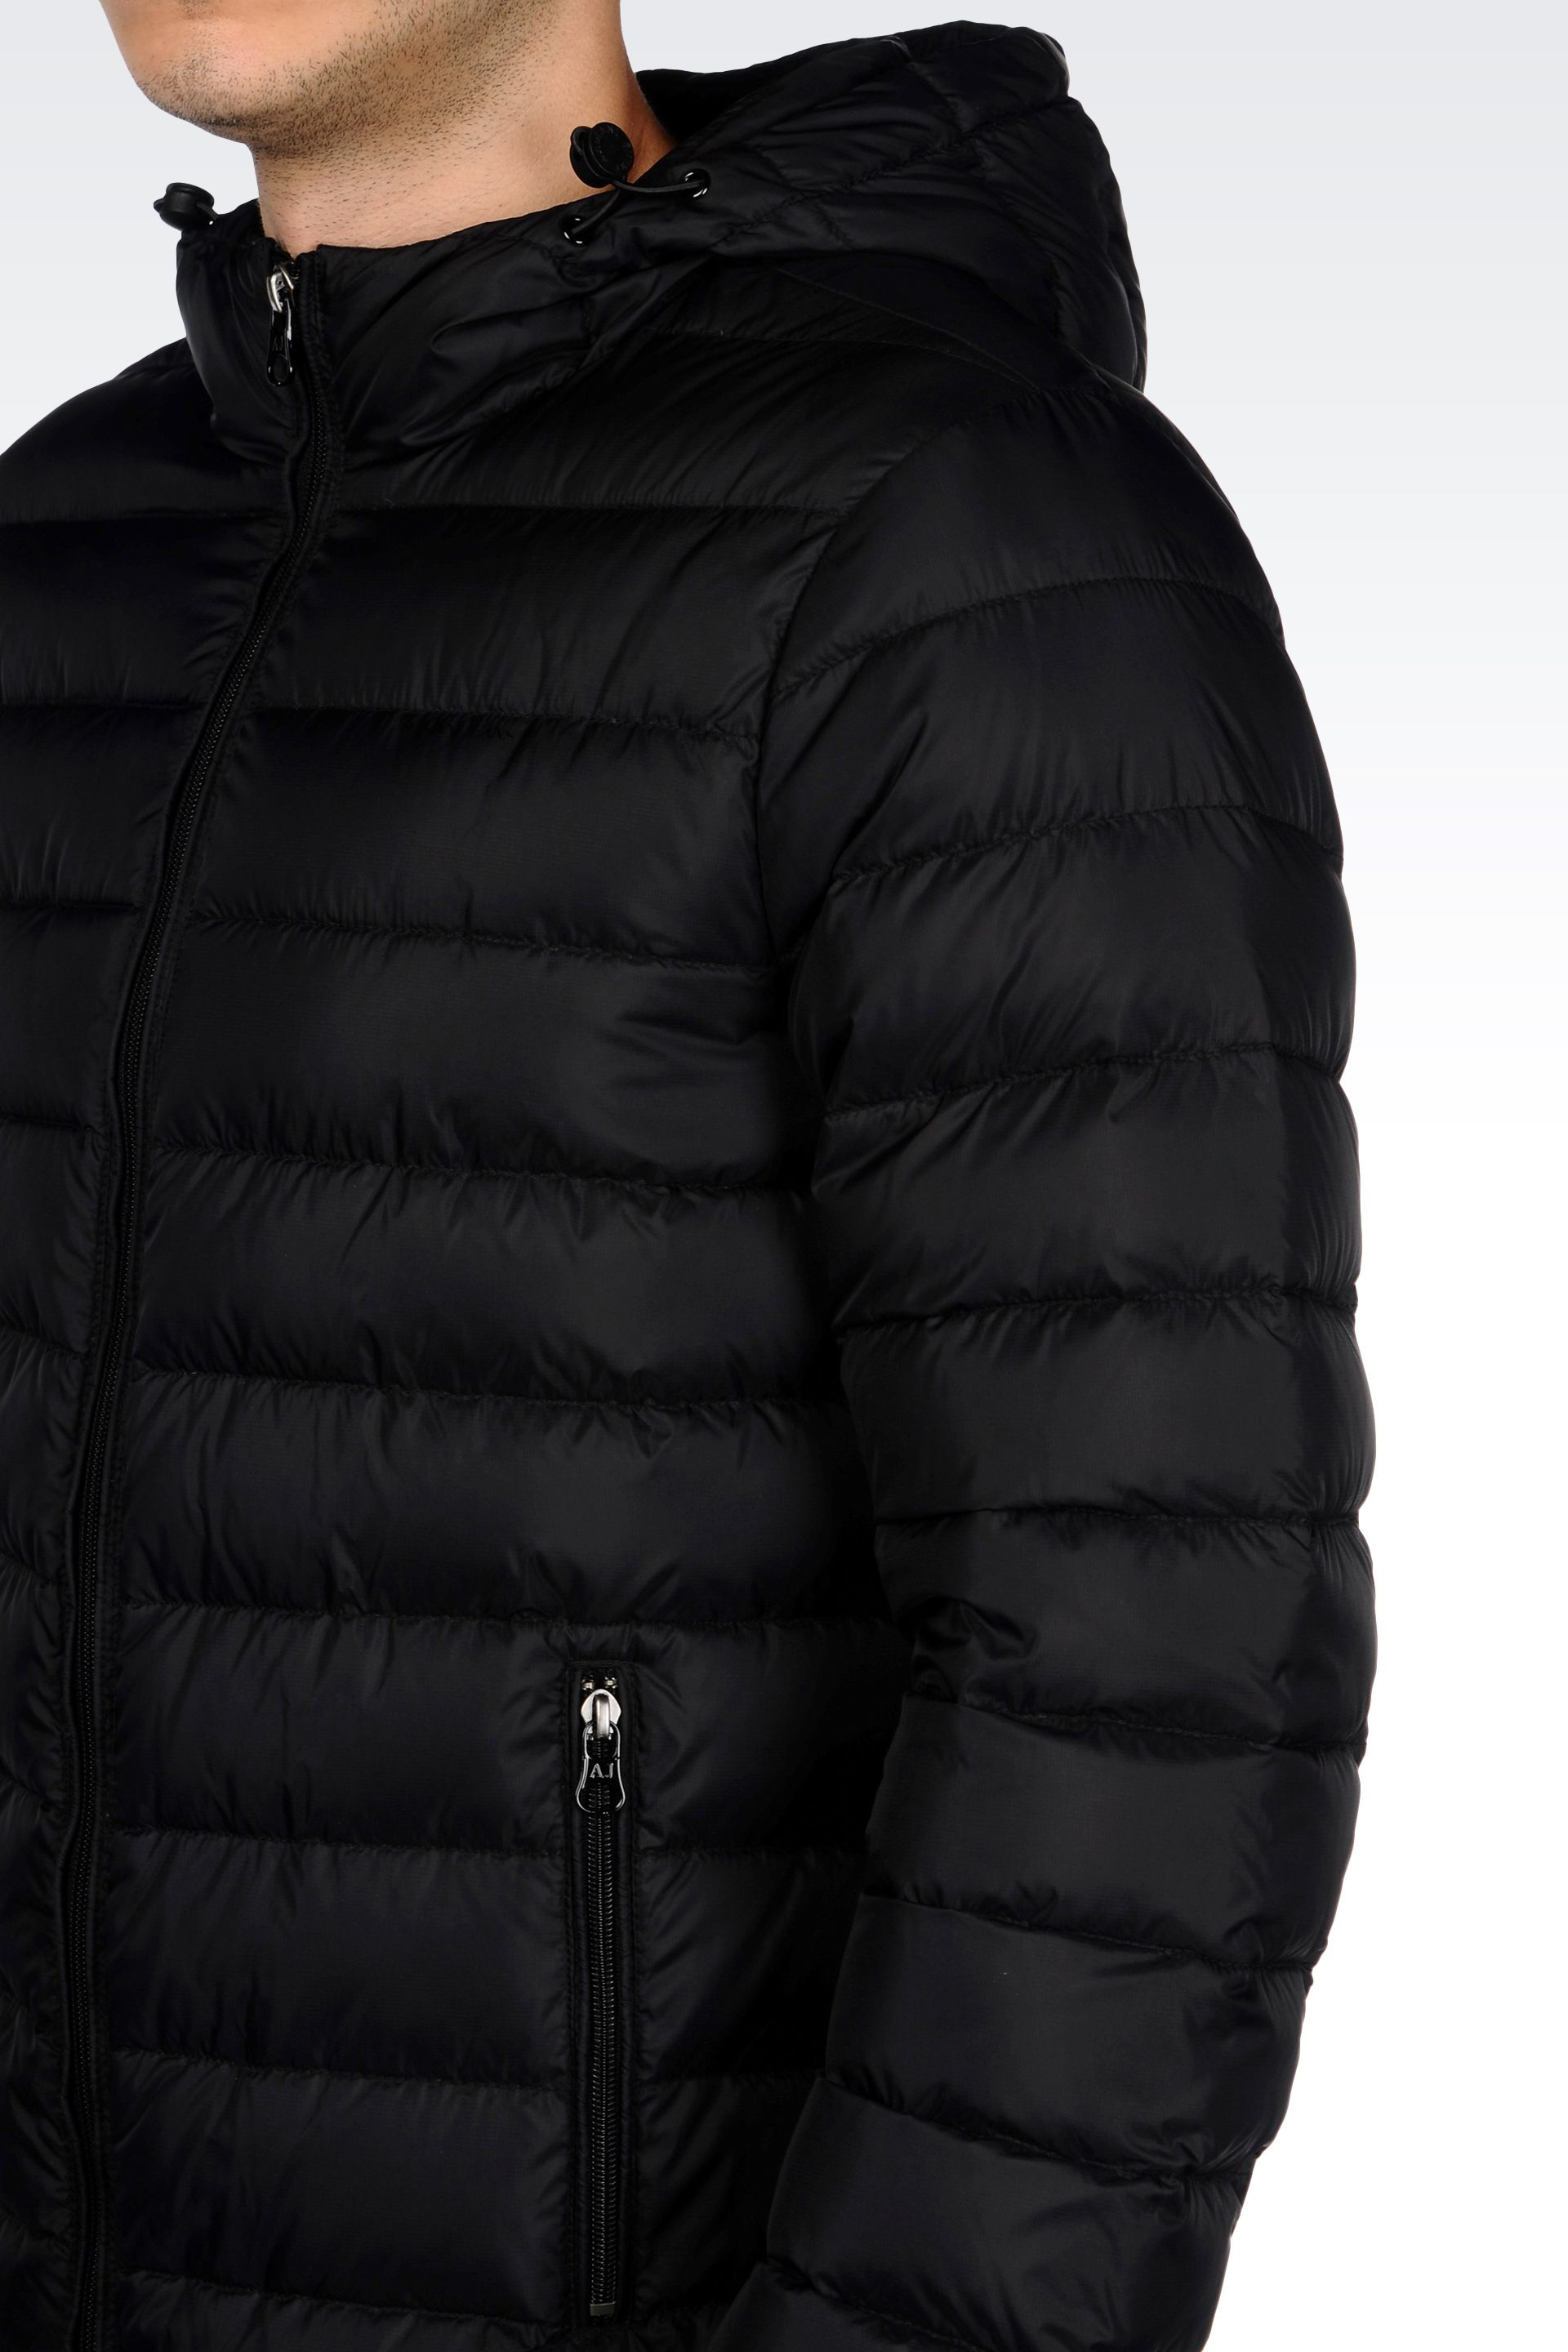 Armani jeans Hooded Down Jacket in Technical Fabric in Black for Men | Lyst